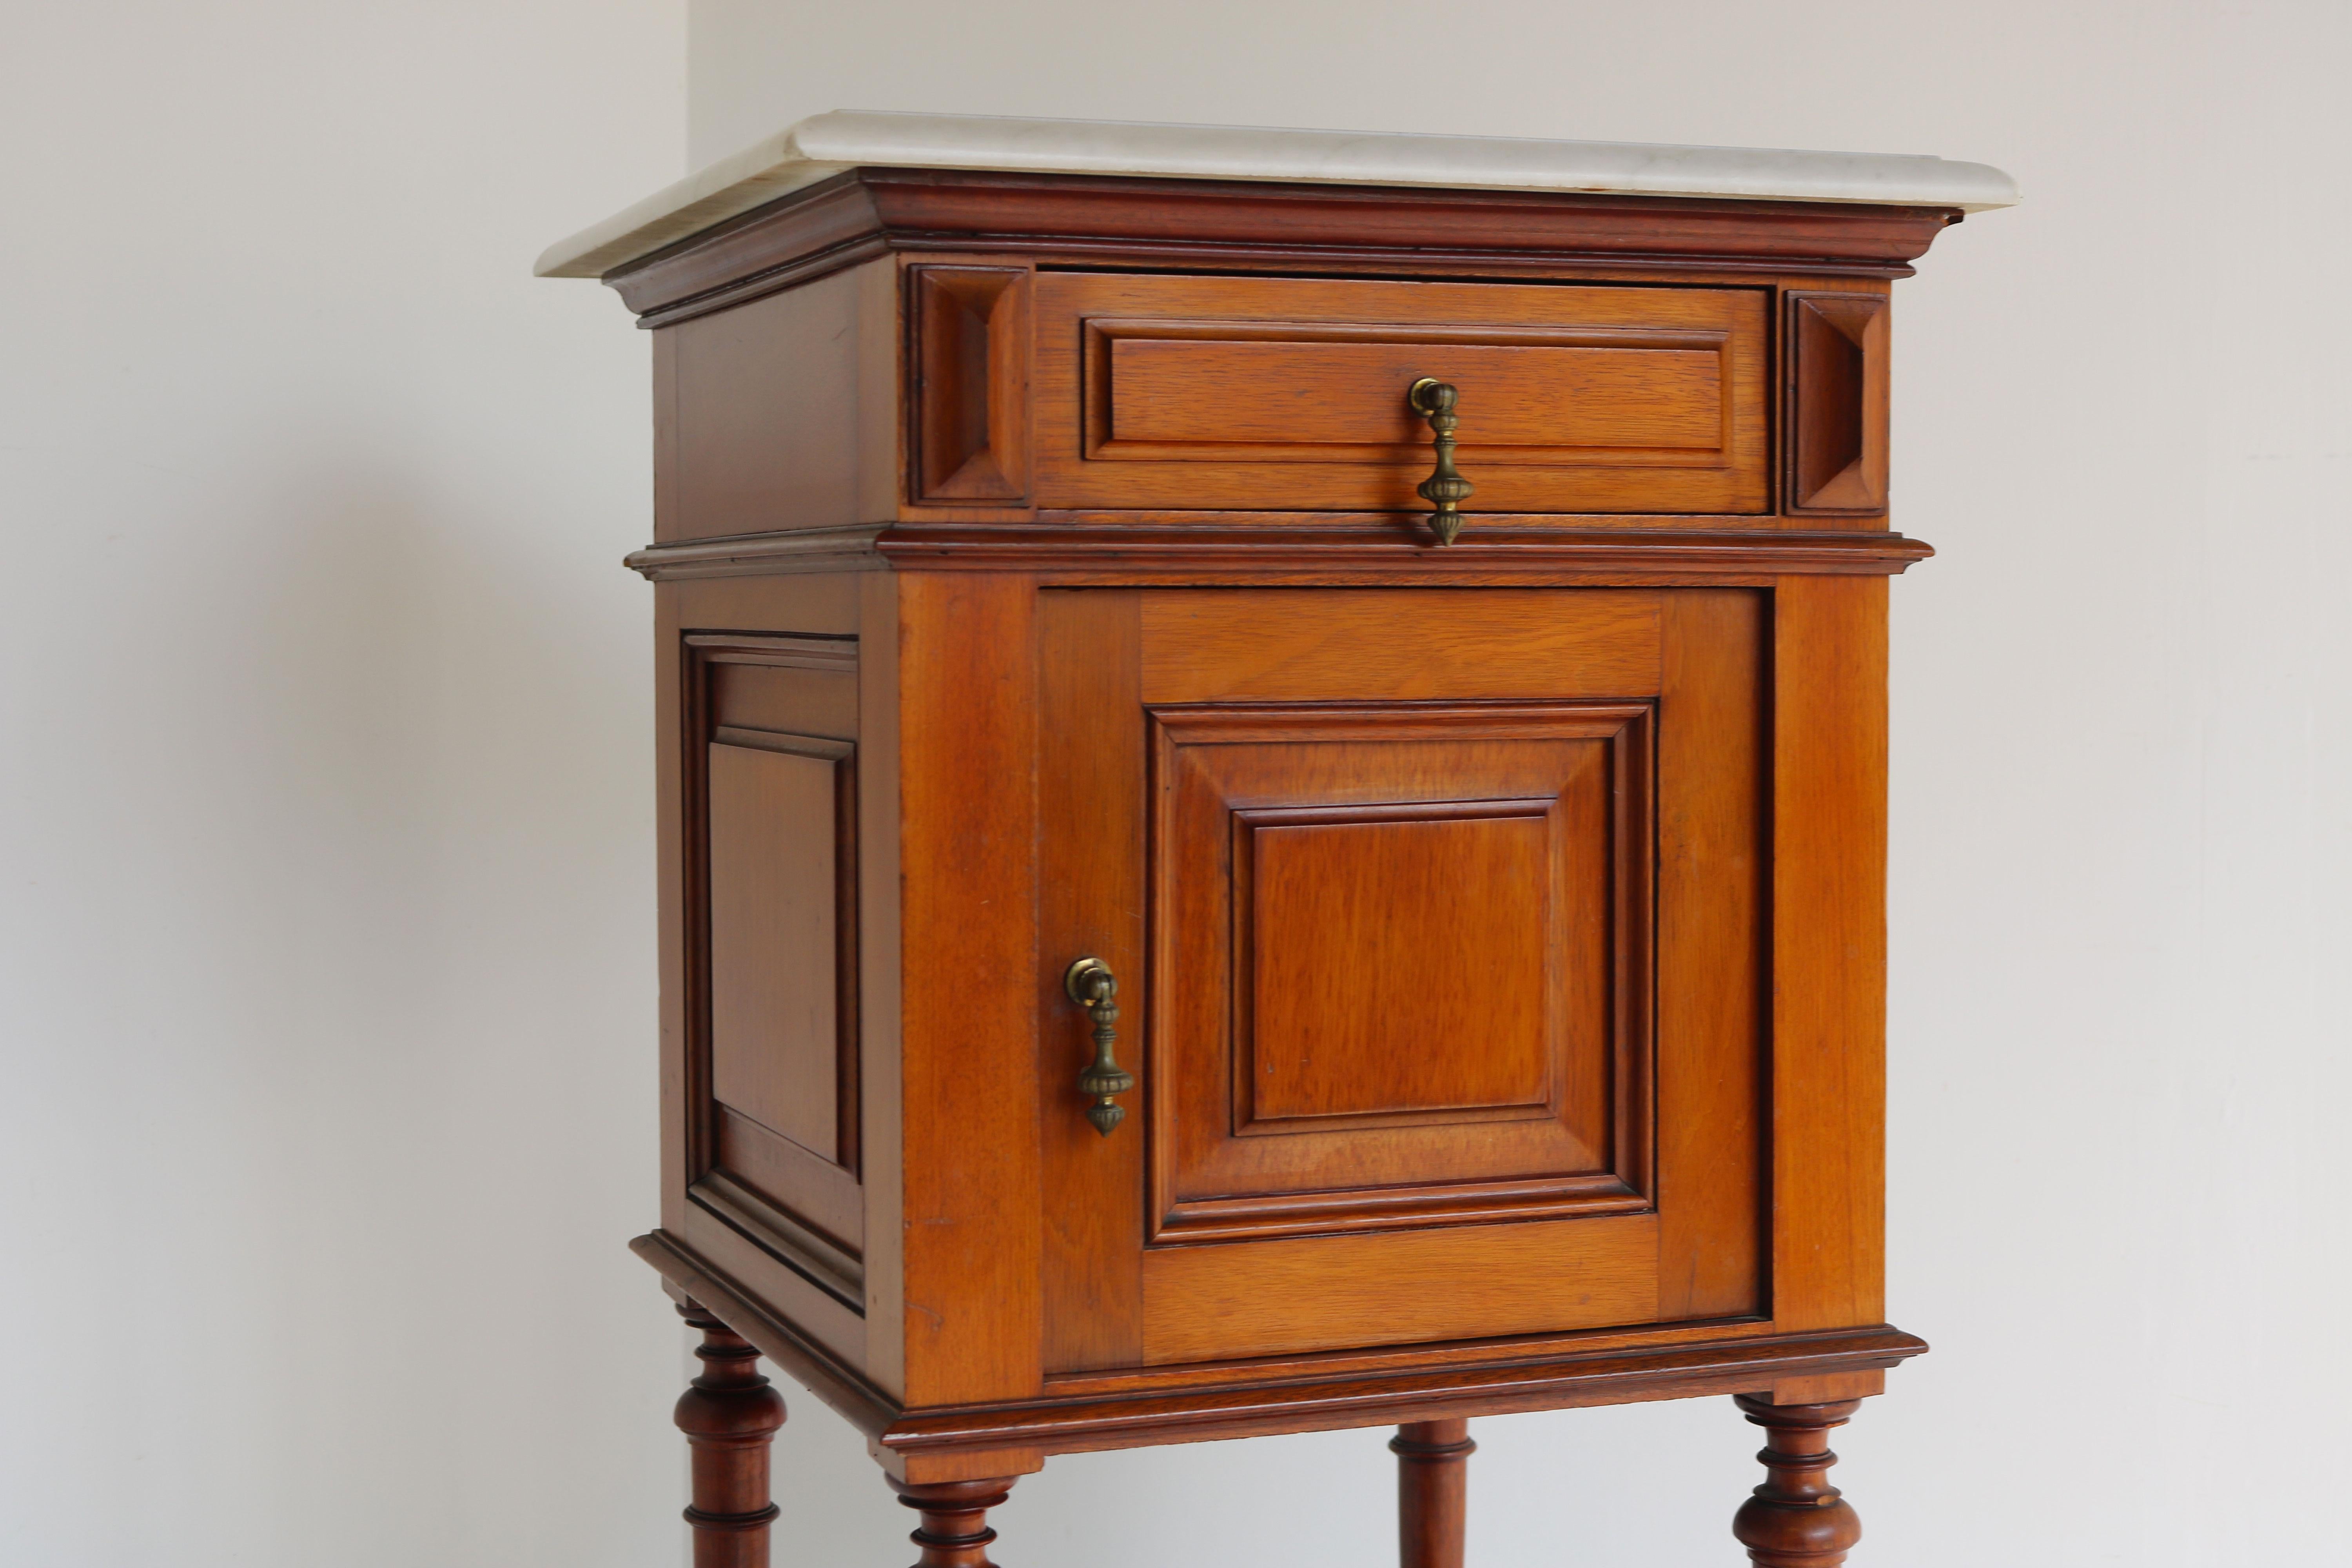 Gorgeous antique nightstand from France late 19th century.
Made from Mahogany on oak. Gorgeous quality and craftsmanship. The top is made from Italian Carrara marble with nice carved edges. 
The nightstand / side table is finished on all sides so